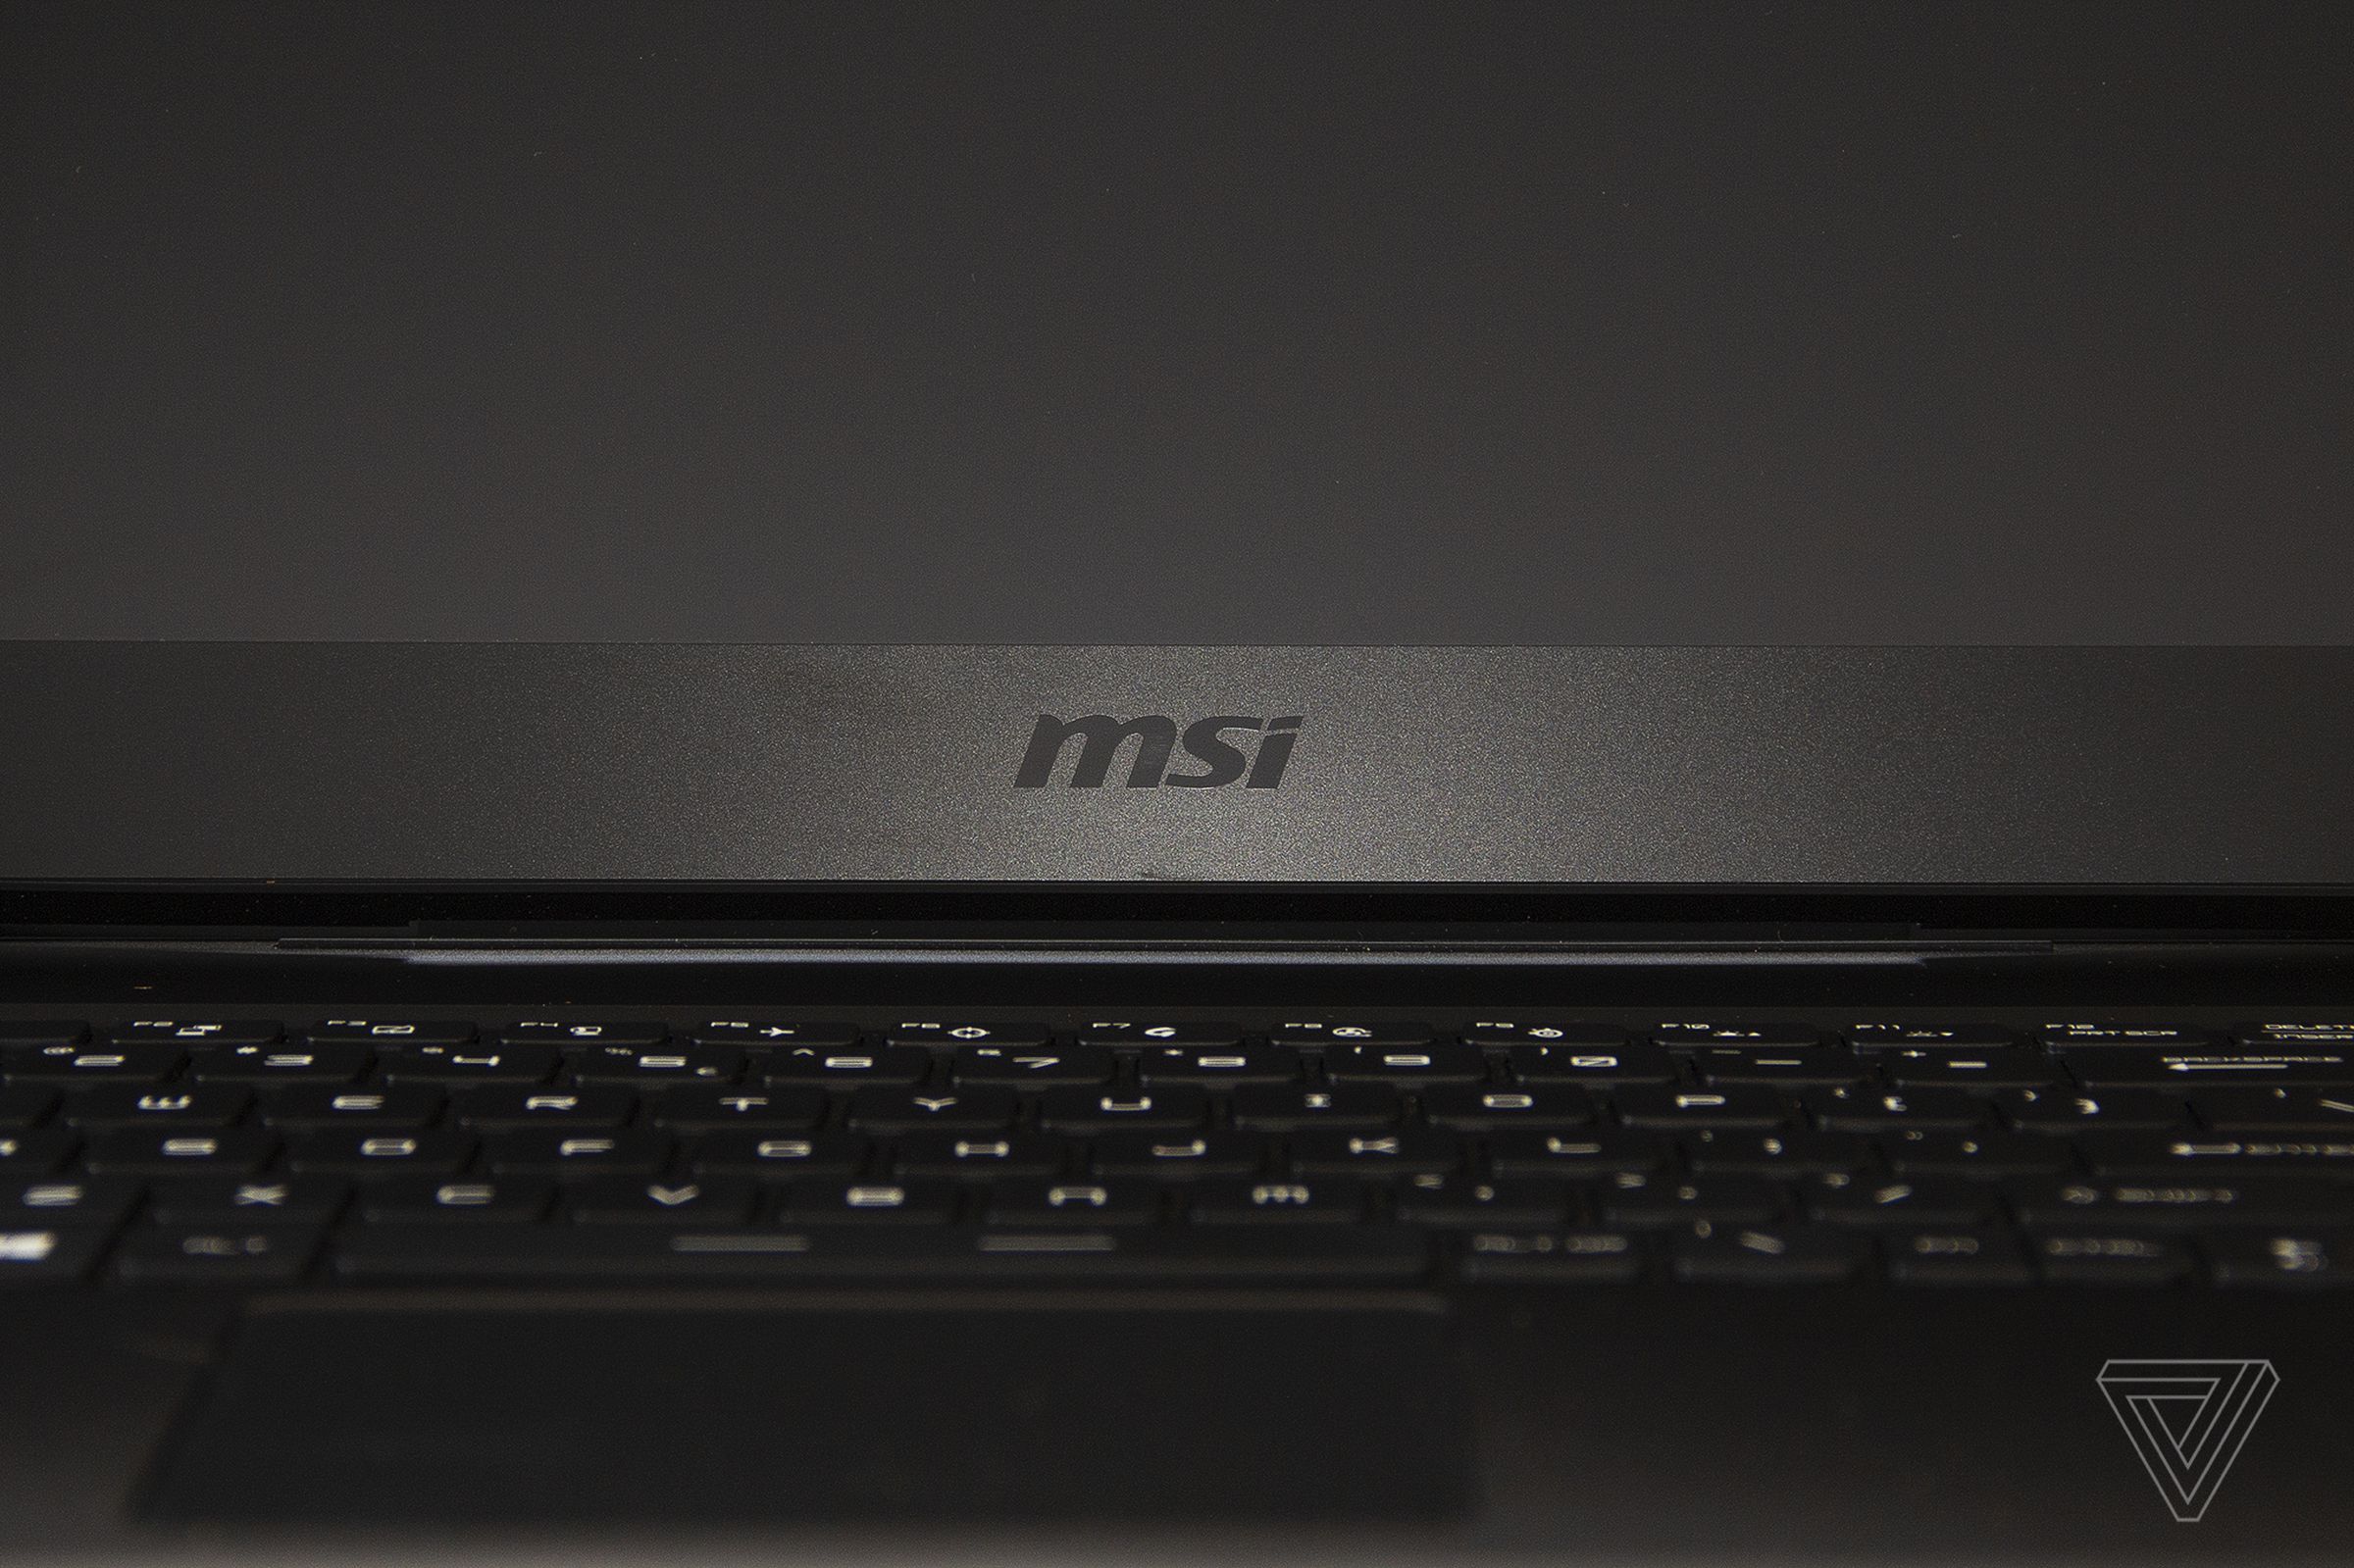 The MSI logo on the bottom bezel of the MSI GP66 Leopard display, seen close up.